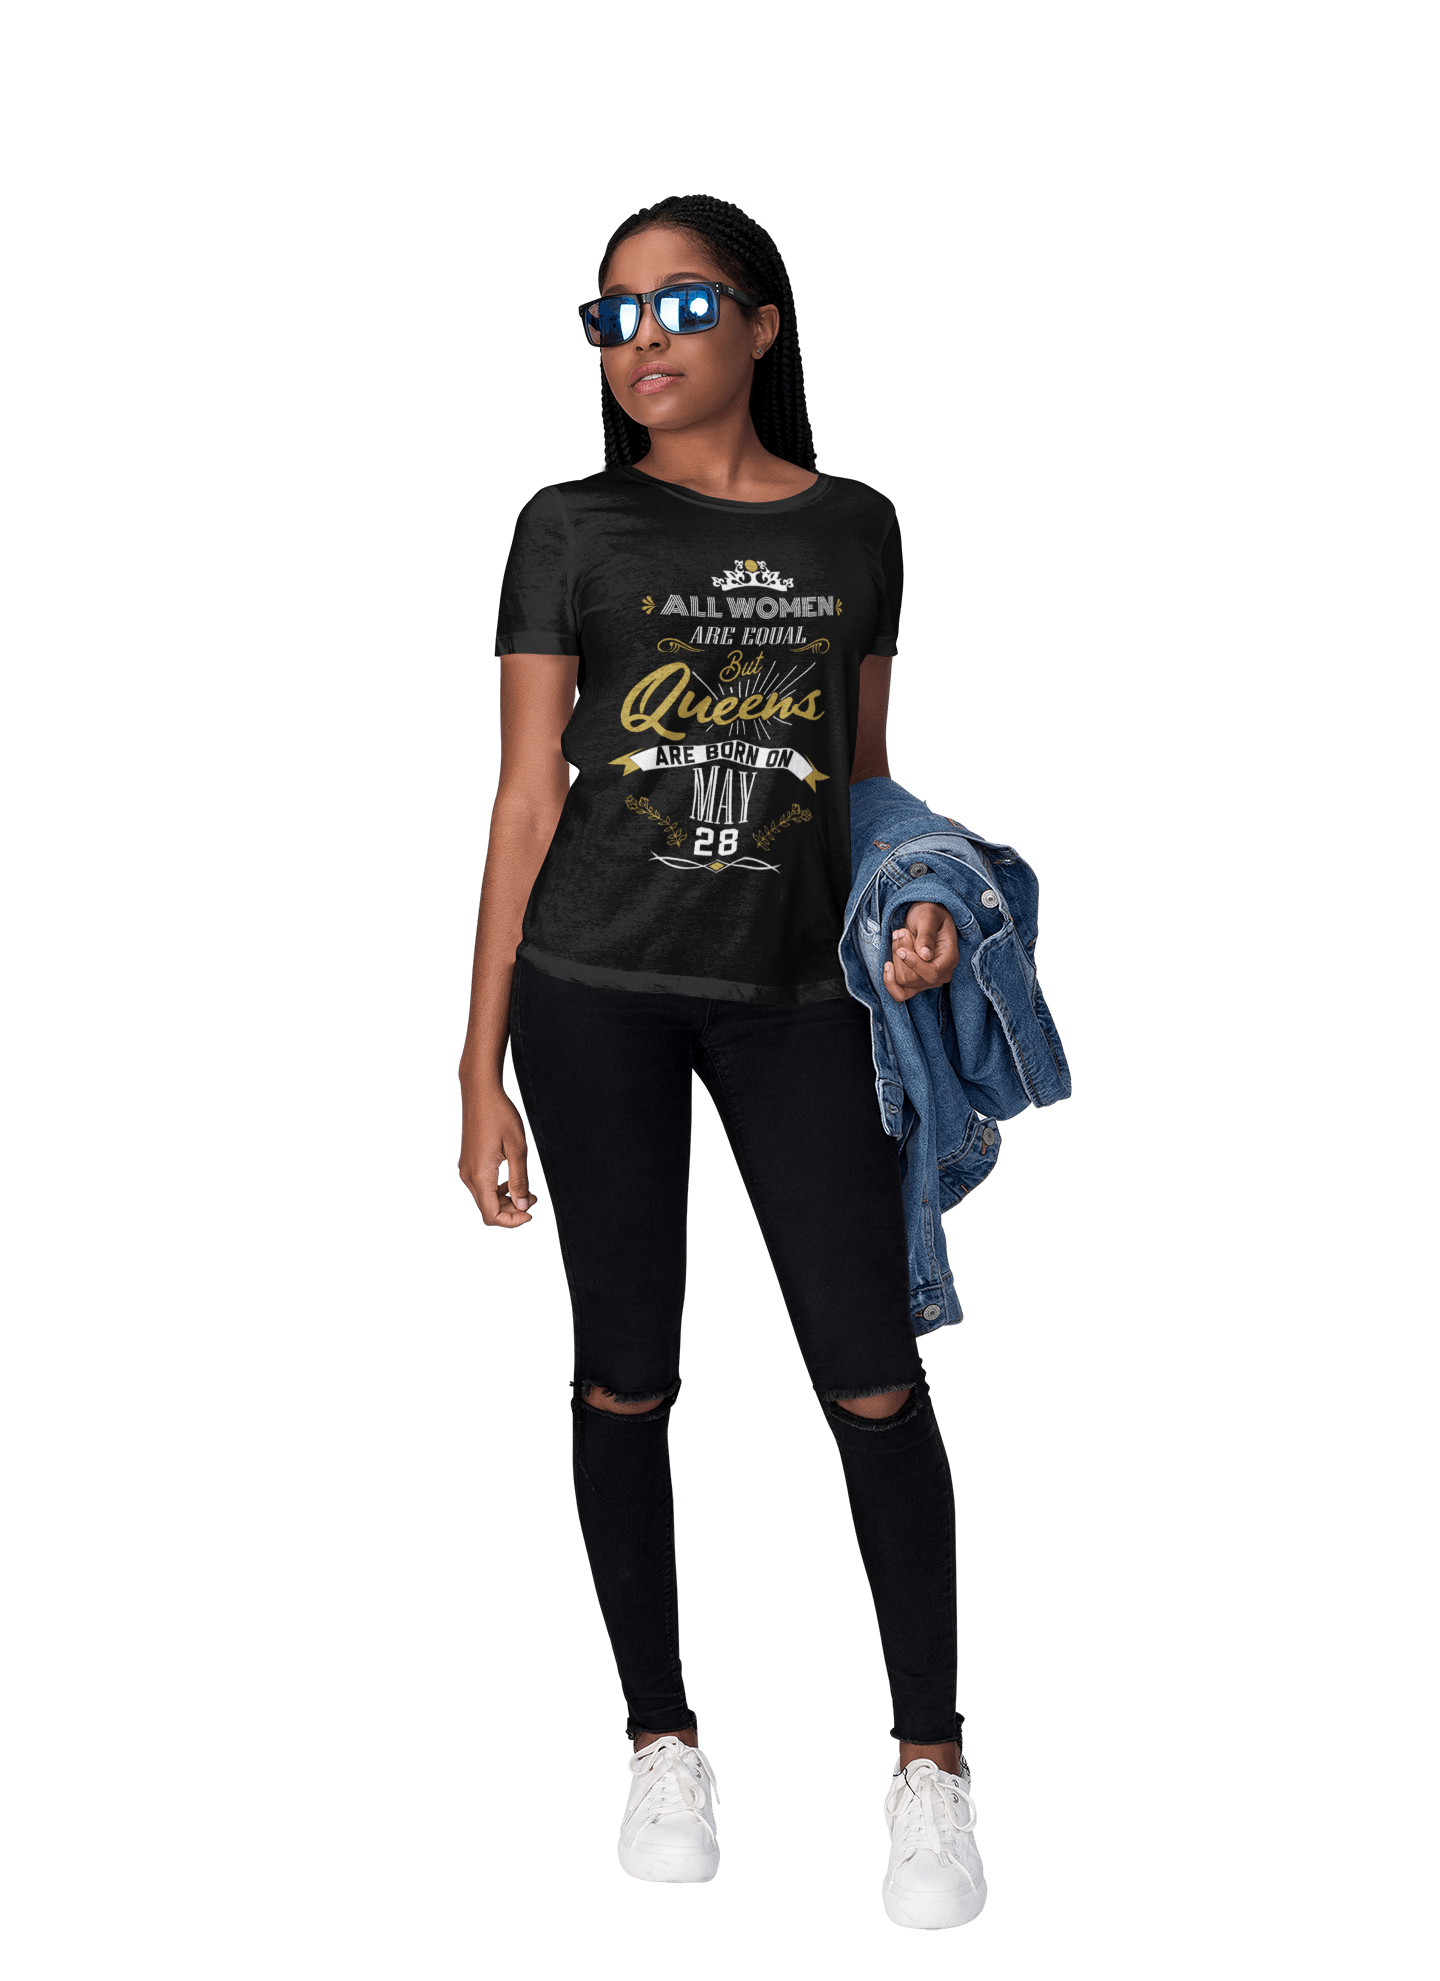 Queens are Born in May Personalized Date T-Shirt-T-Shirt-Get Me Bedazzled